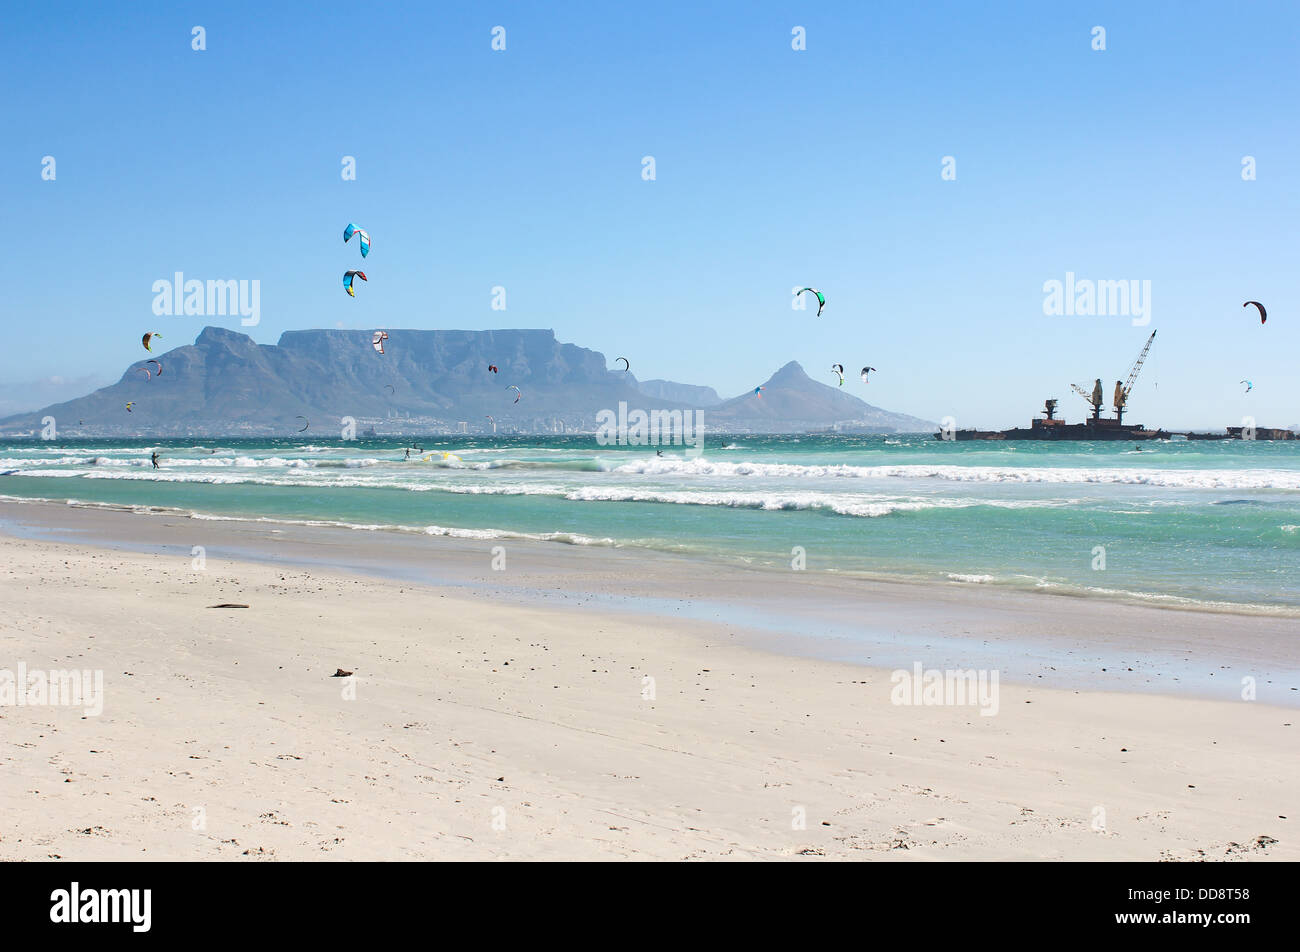 Kiteboarders at Milnerton Beach in Cape Town, South Africa Stock Photo